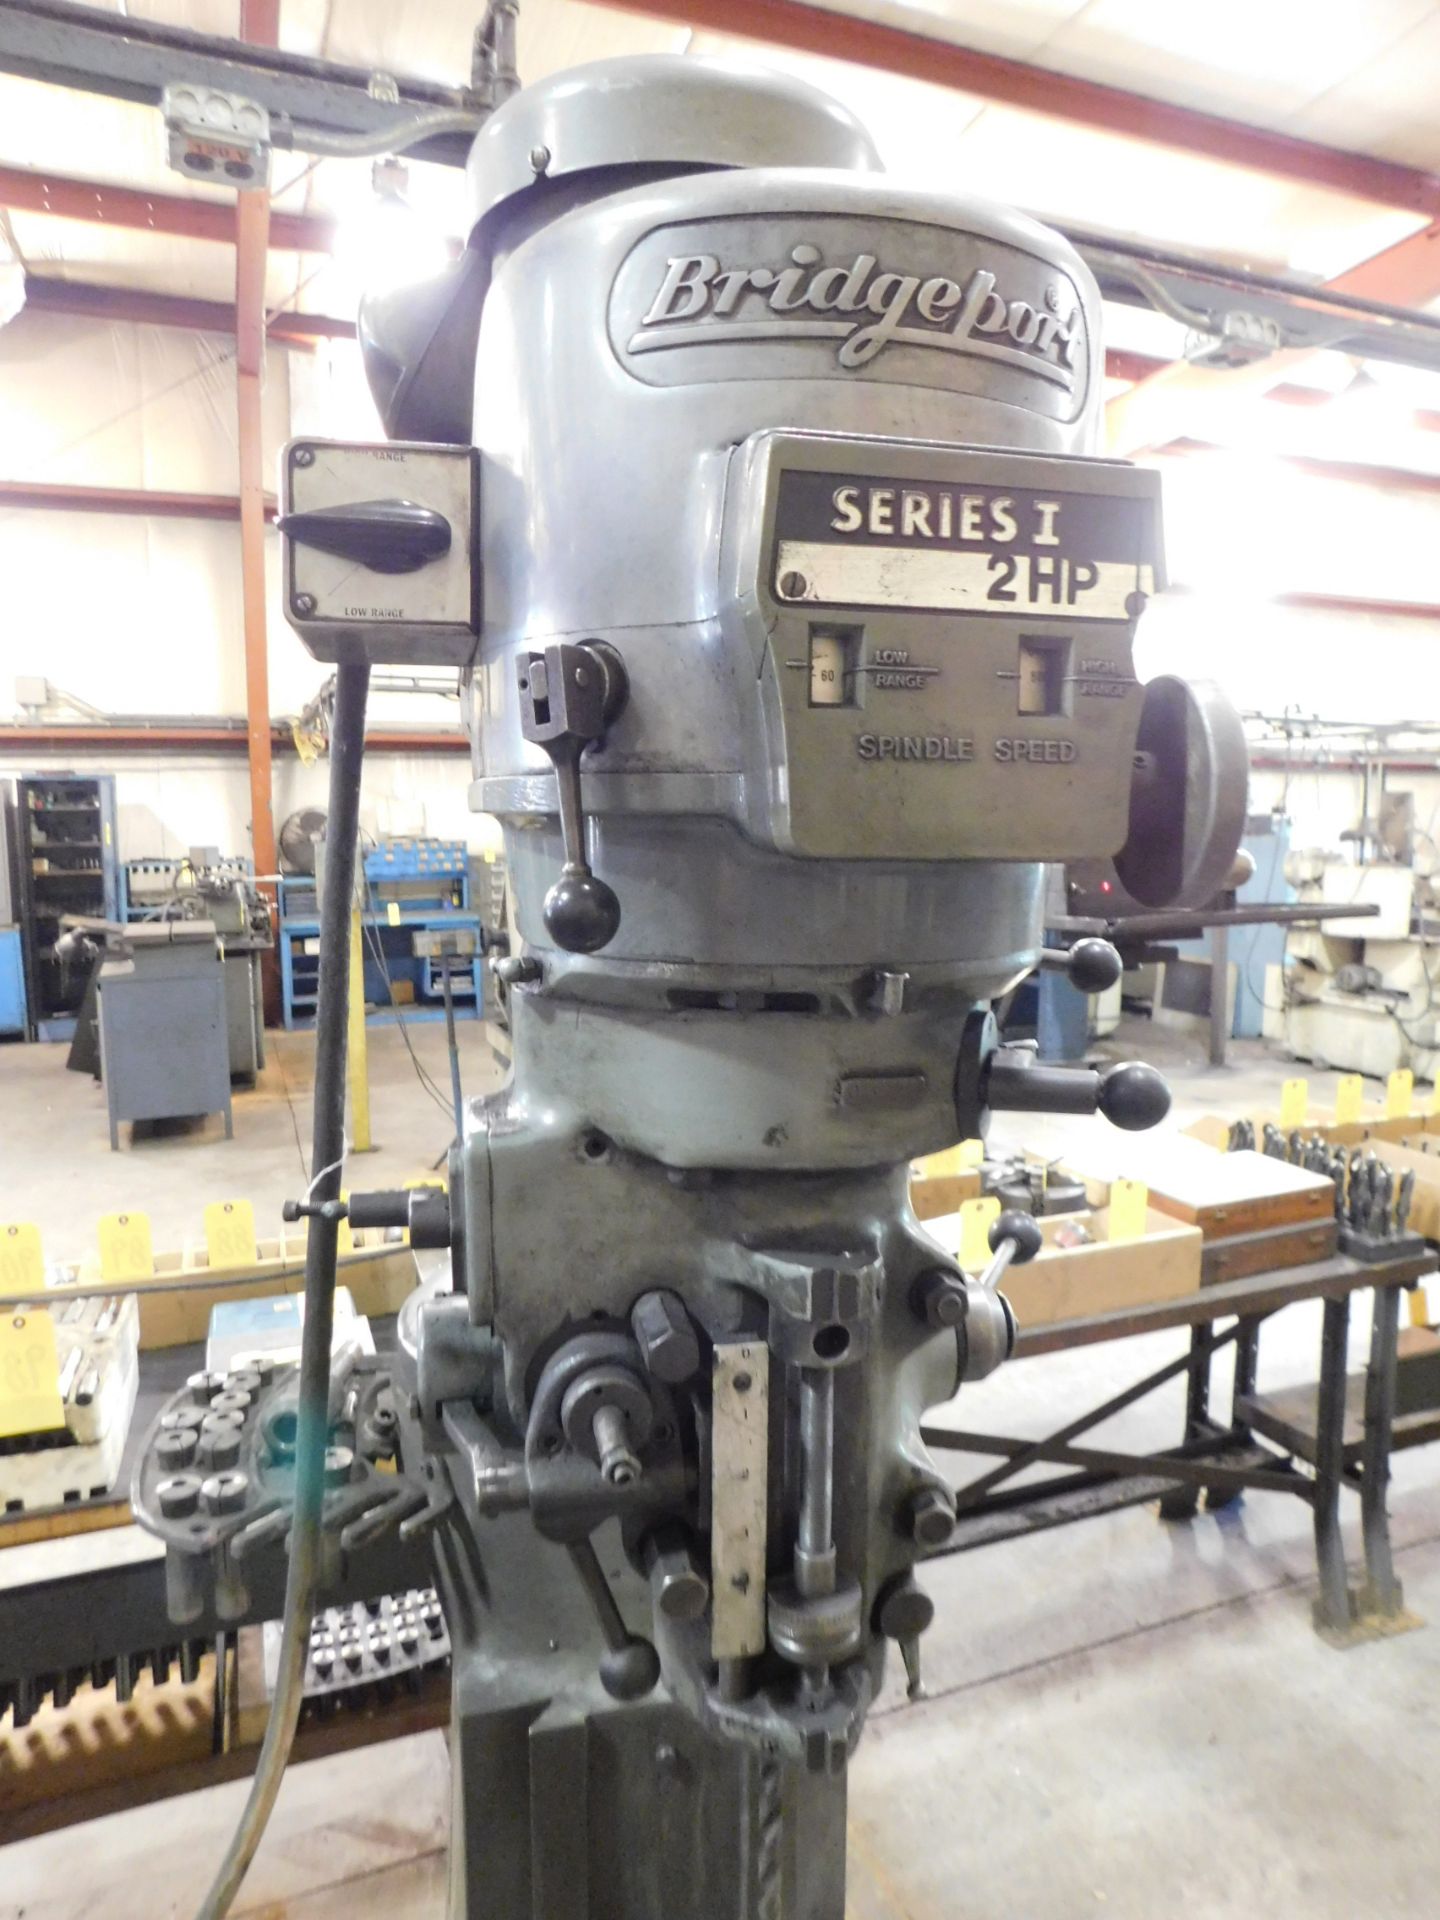 Bridgeport Series I, 2 HP Vertical Mill, s/n 12BR239284, 9” X 42” Table, Accurite D.R.O. - Image 8 of 11